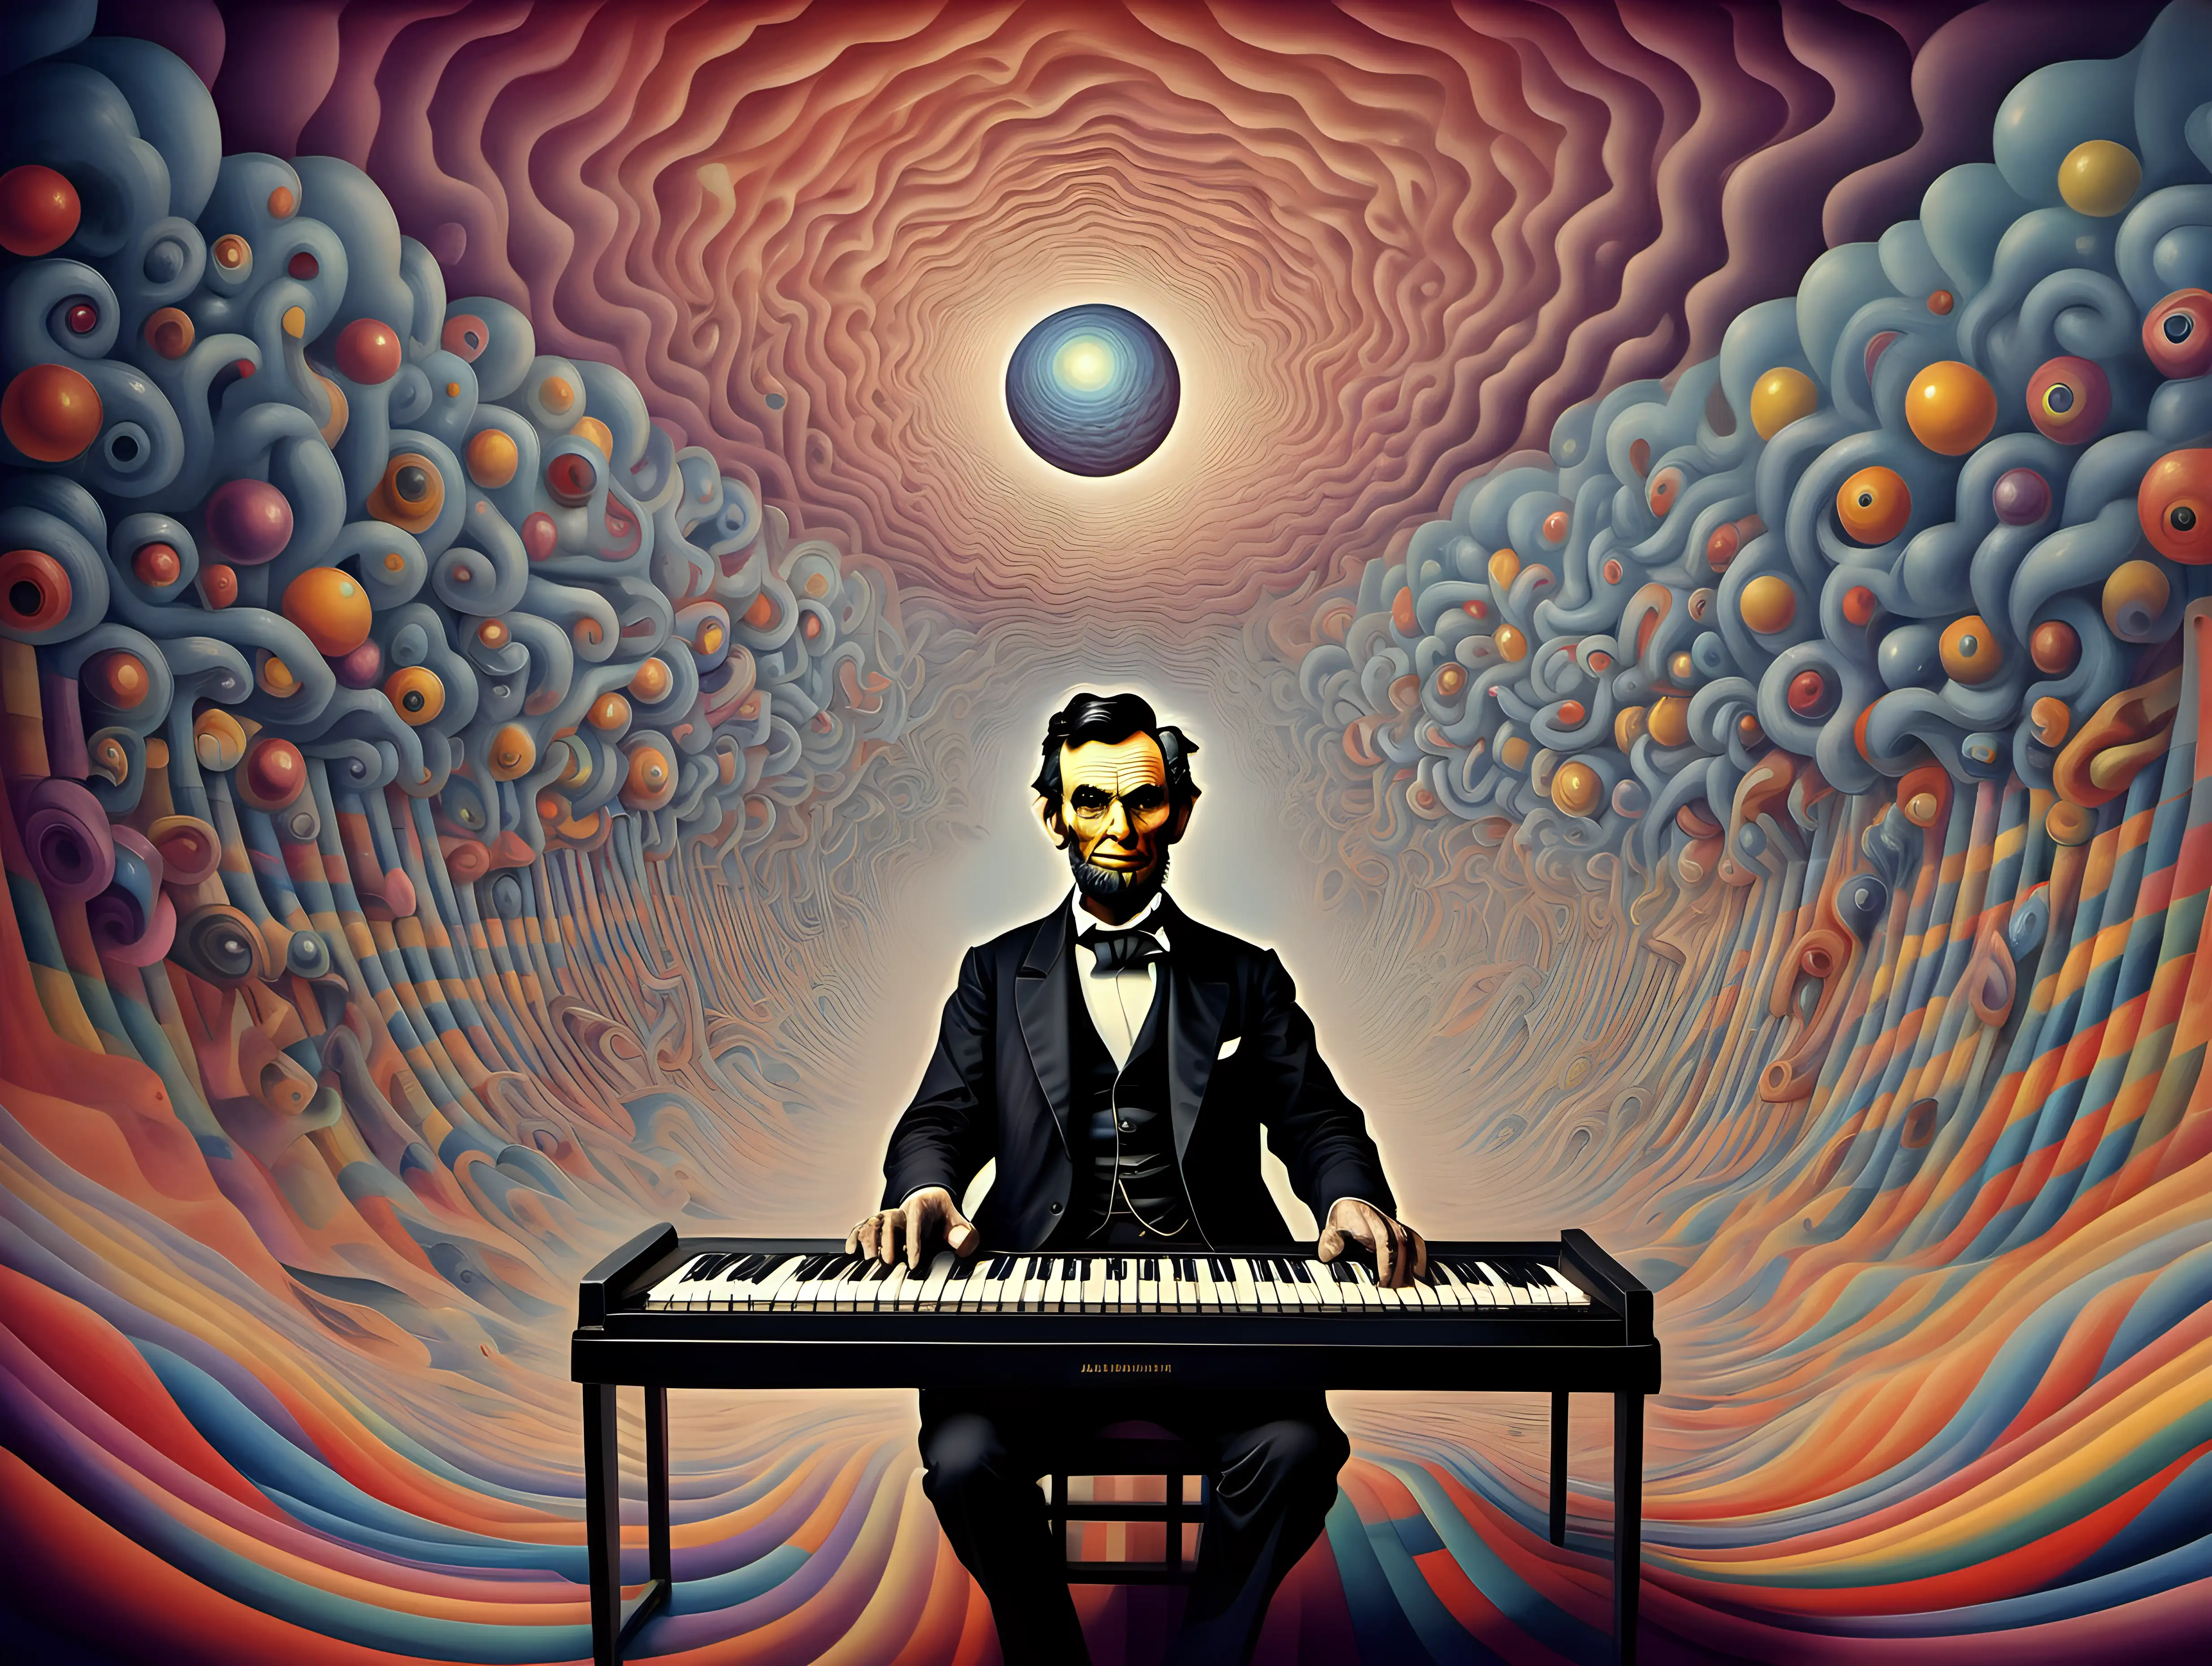 my mind on lsd while playing keyboards in style of surrealism and abstract by Abraham Lincoln